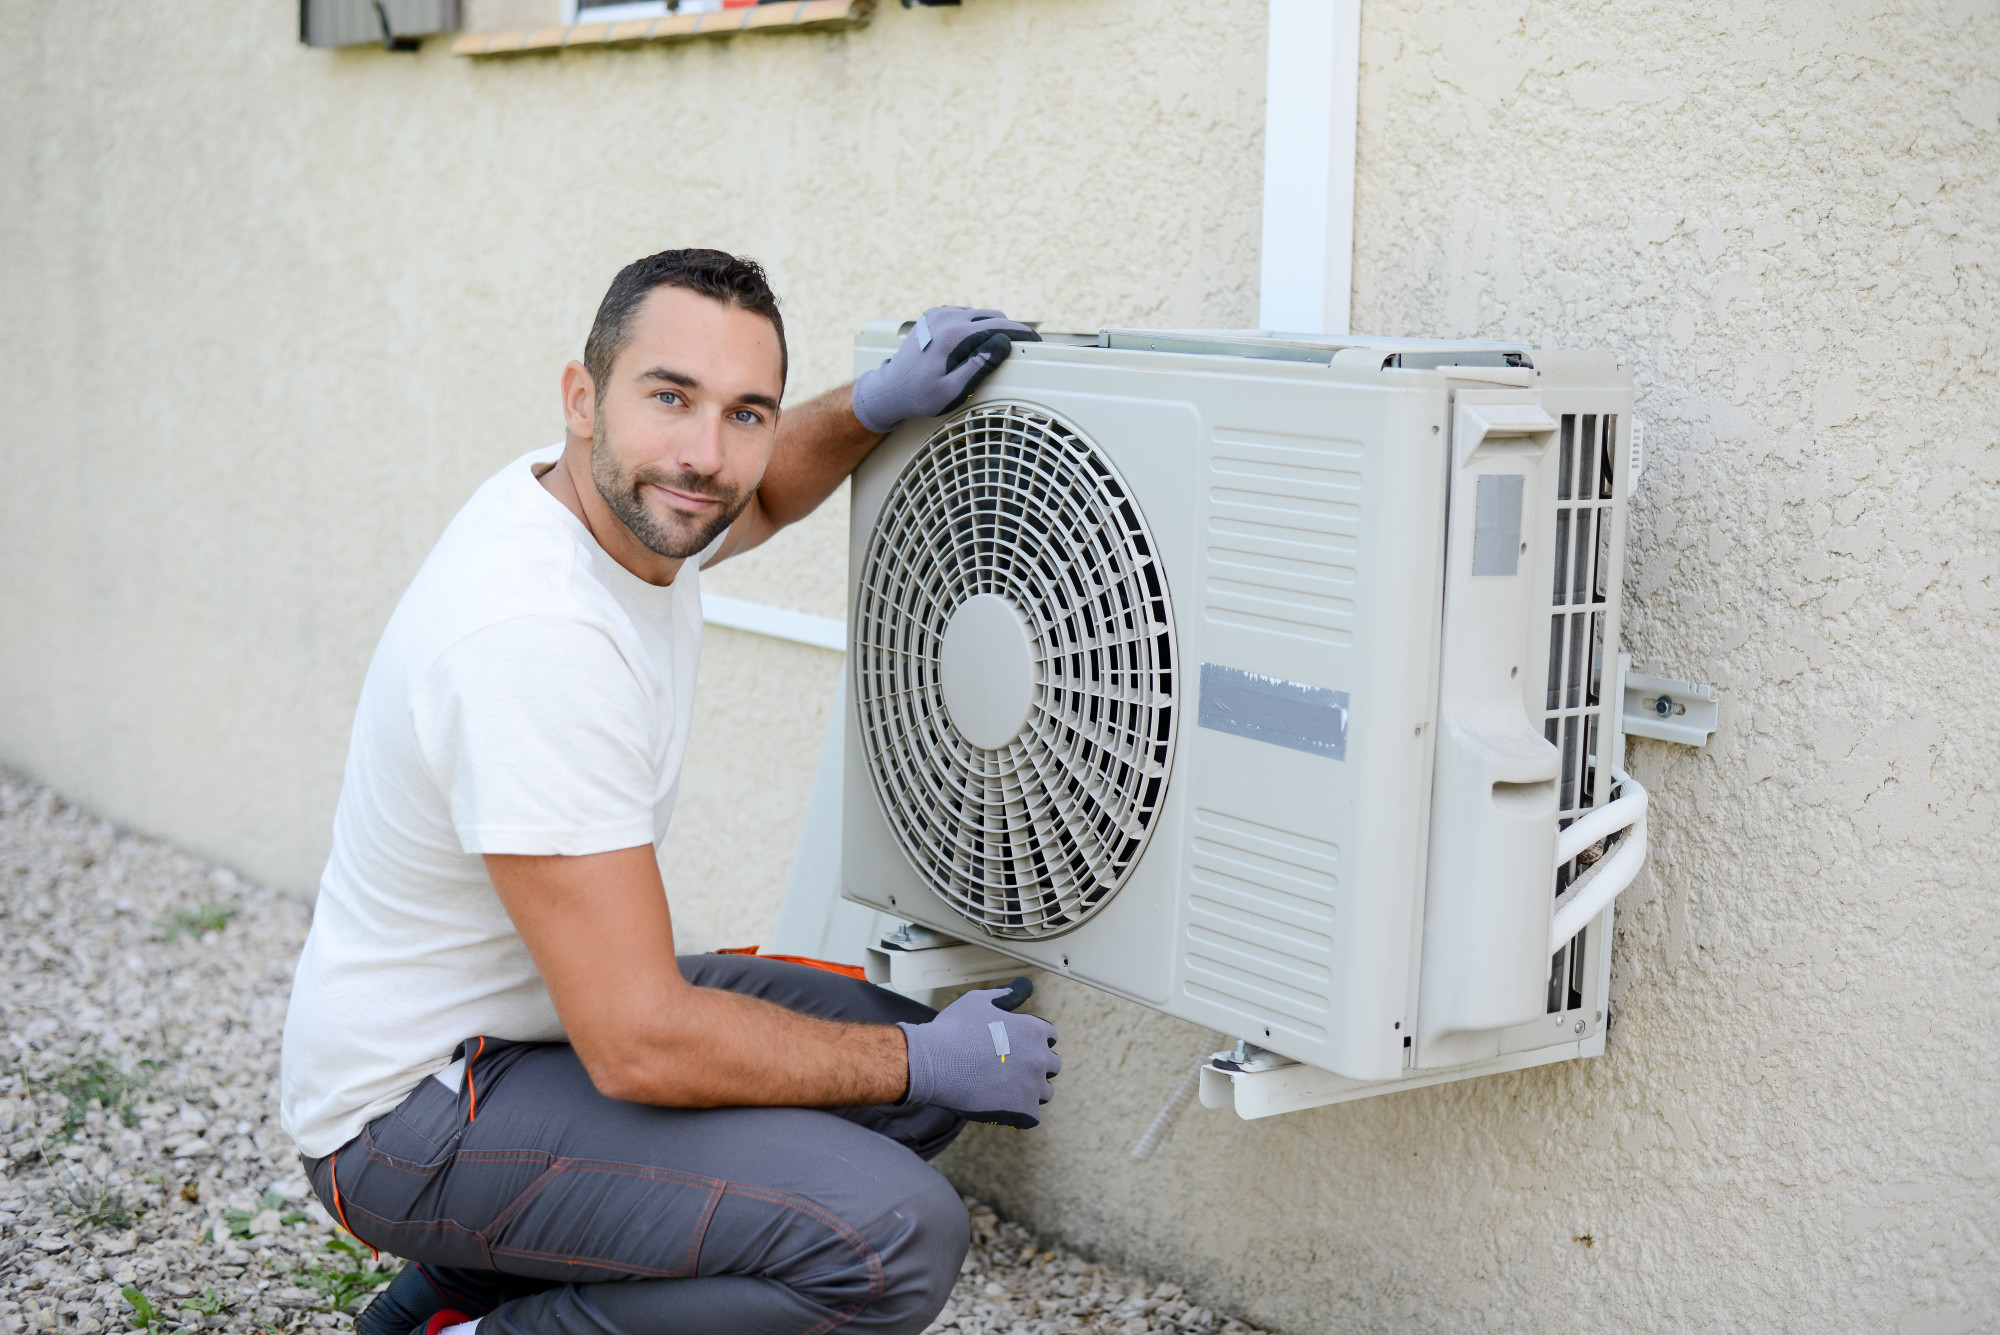 How to Prepare Your Air Conditioner For the Texas Summer Heat